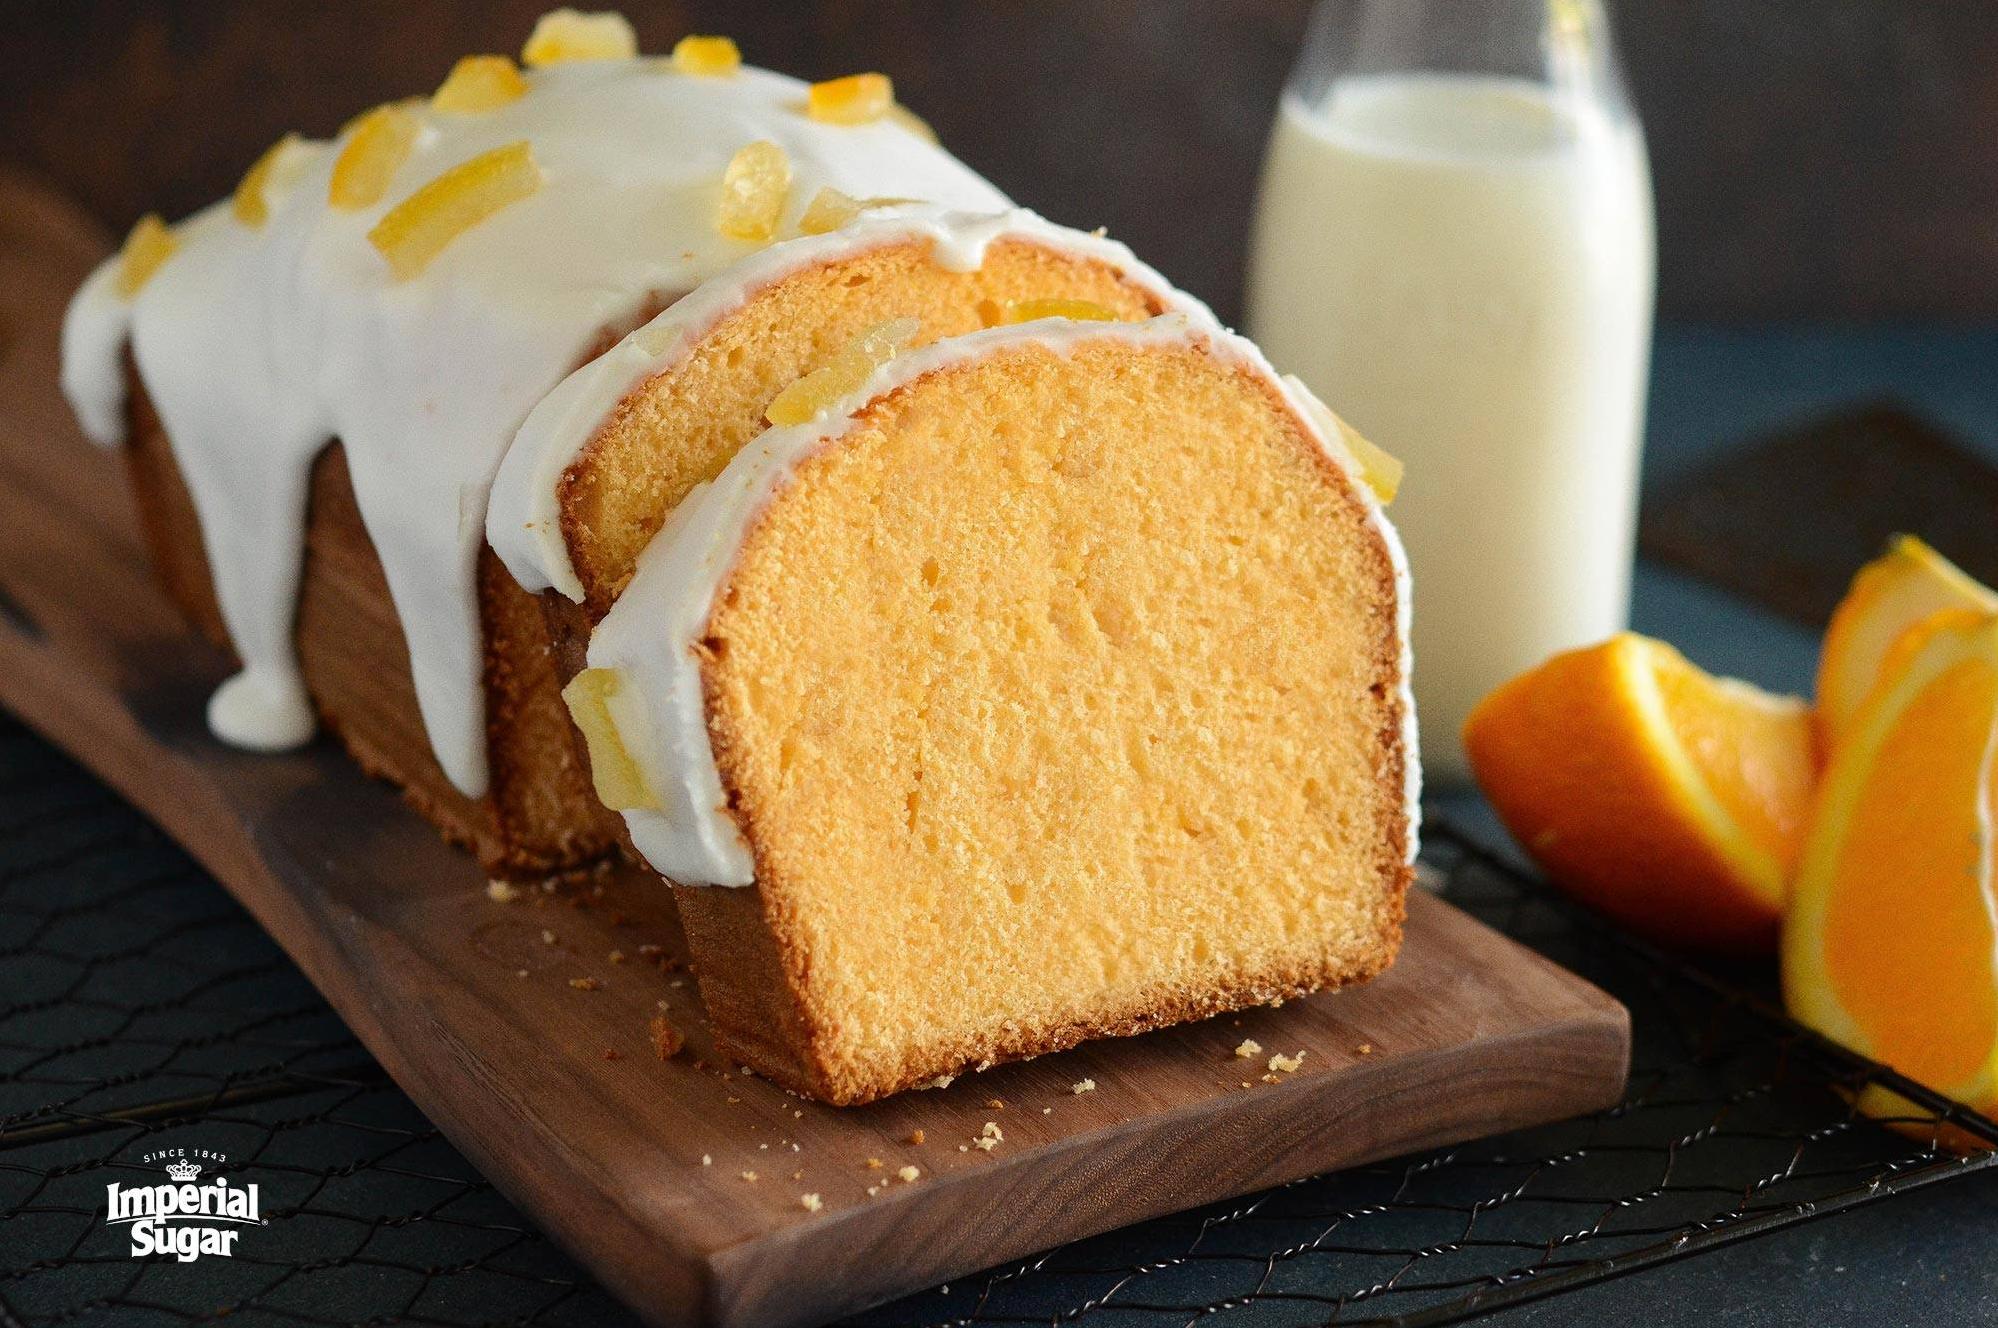  Zesty orange pound cake that will melt in your mouth!